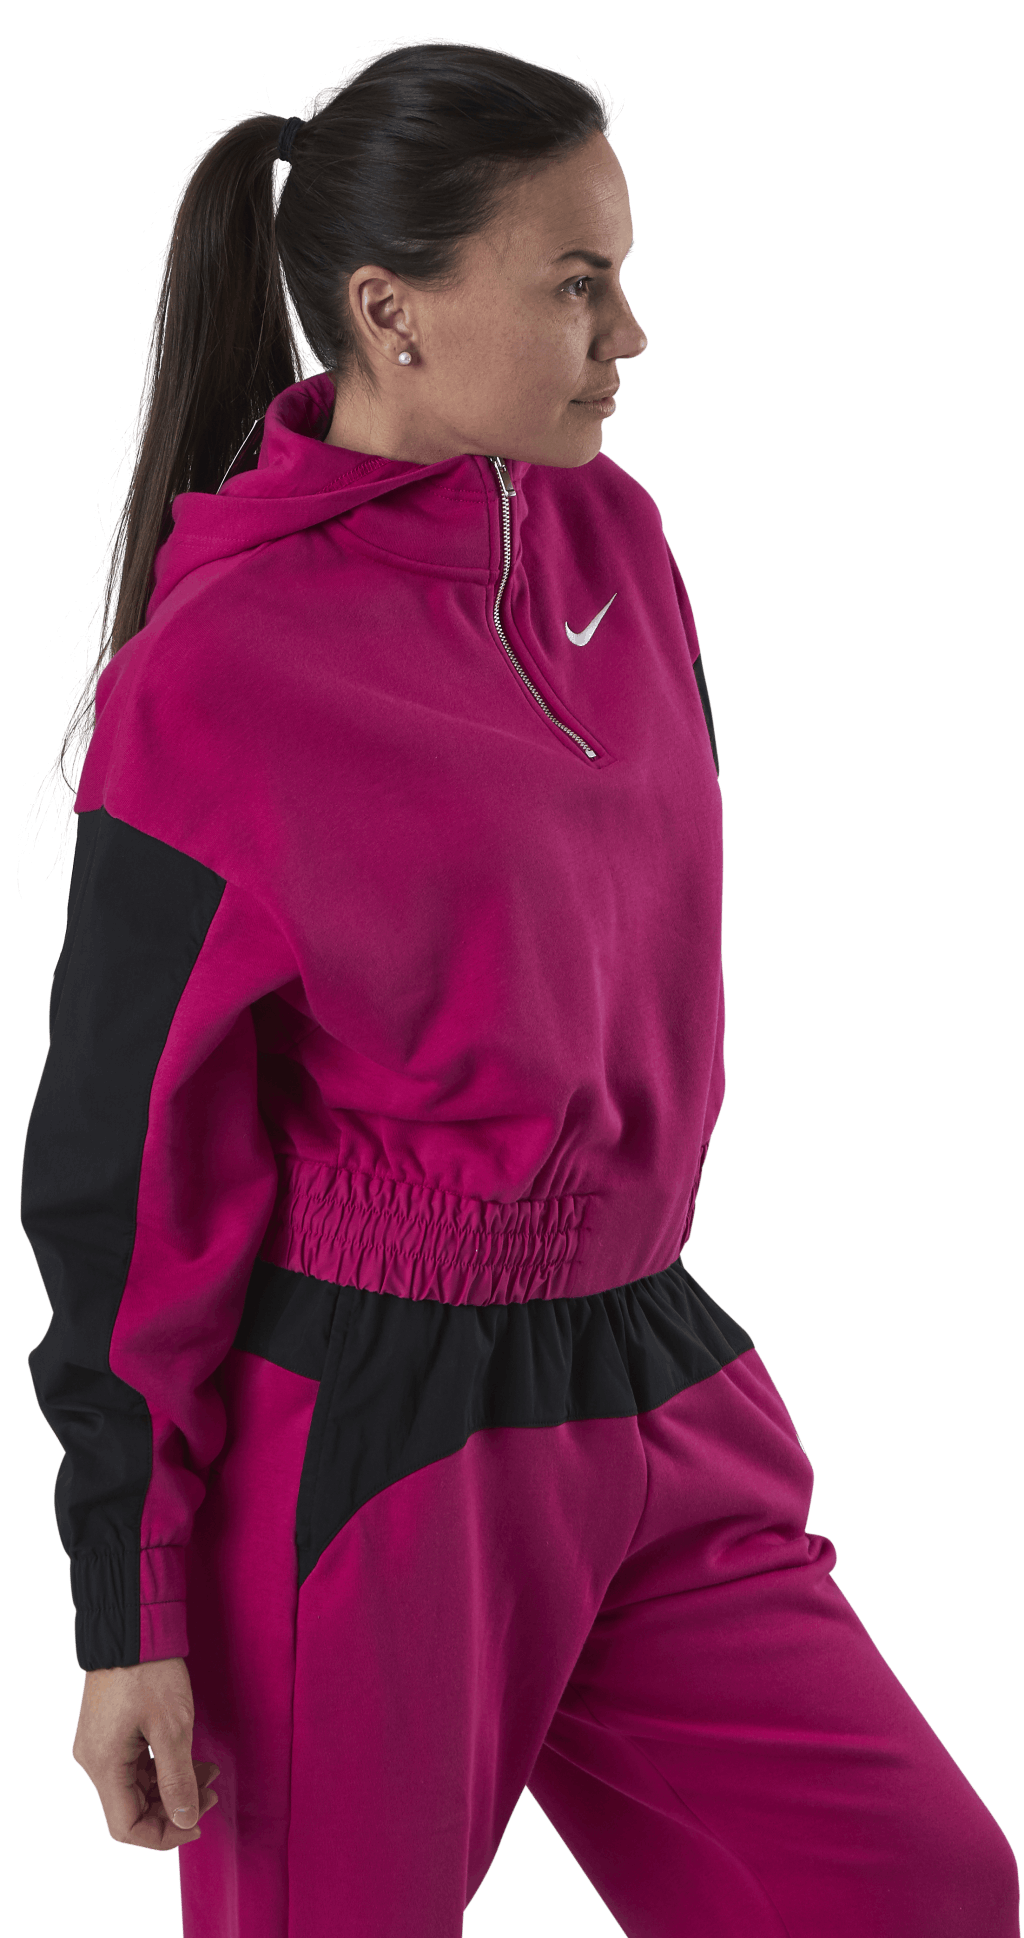 Nsw Icn Clsh Hoodie Qz Mix Pink | The best sport brands | Sportamore